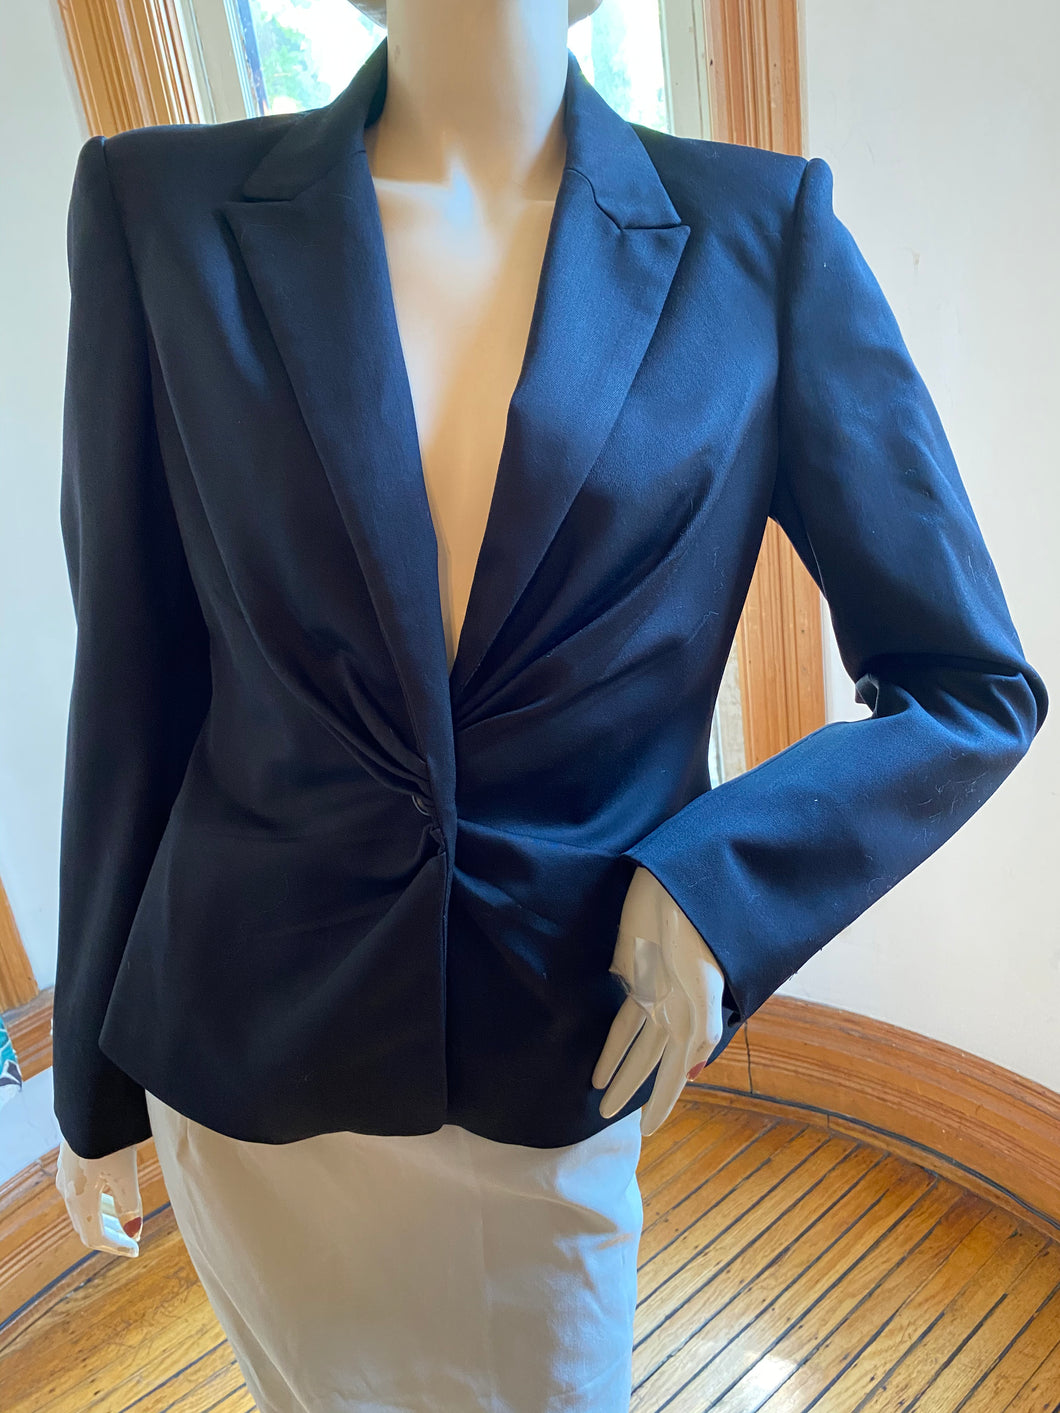 Anna Molinari Black Tailored Jacket with Gathered Front Detail, size M/L (Italian size 46)